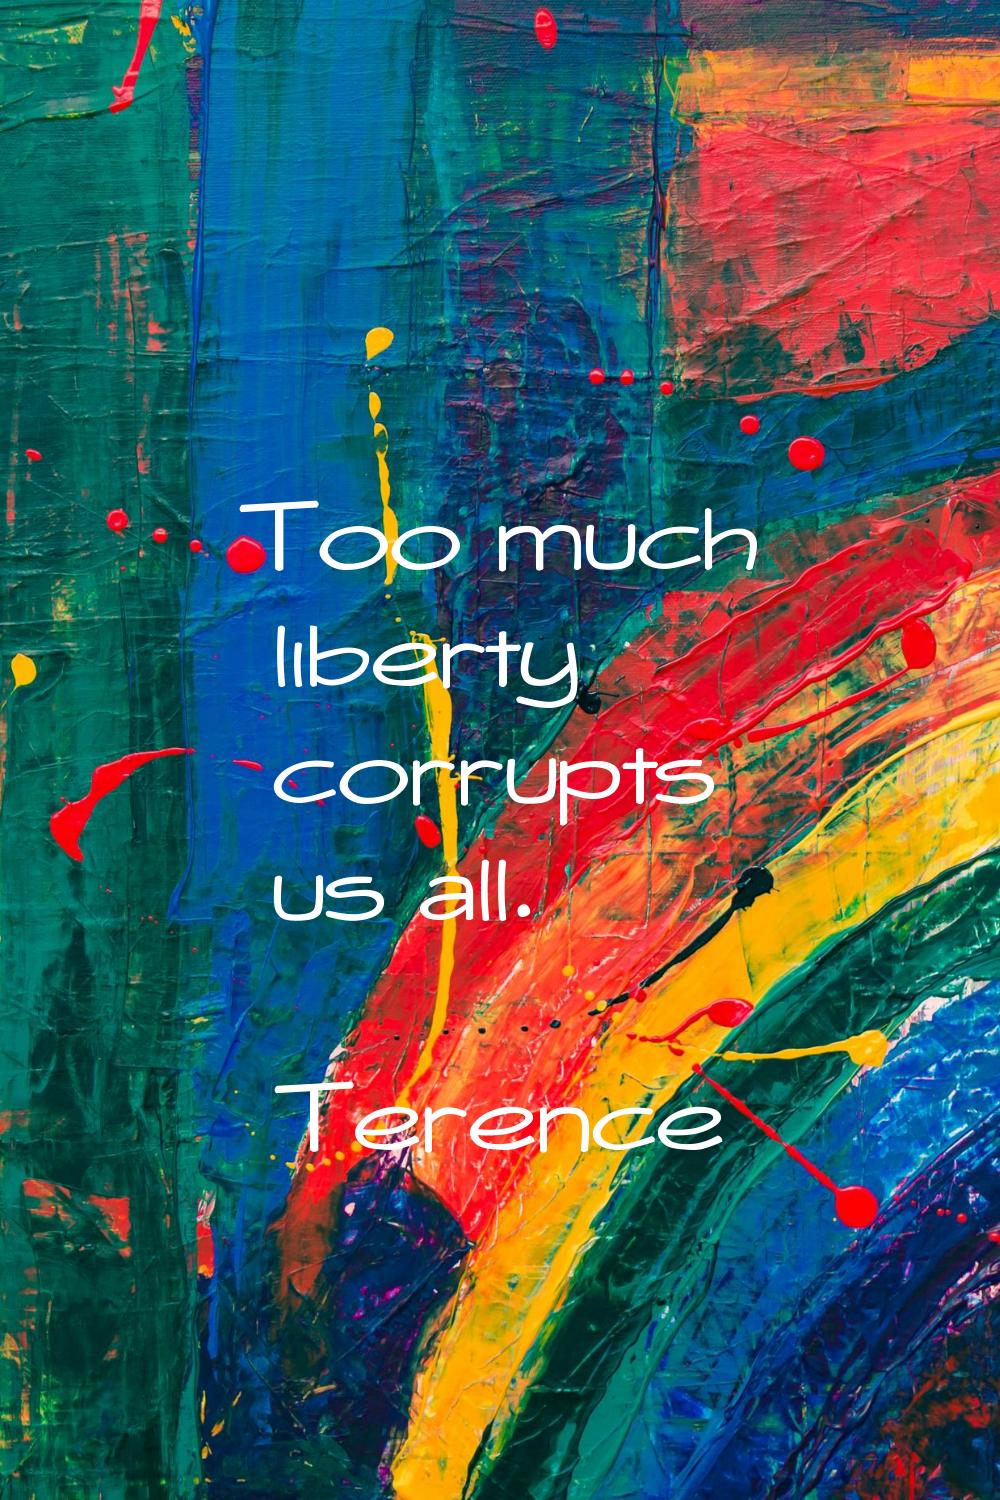 Too much liberty corrupts us all.